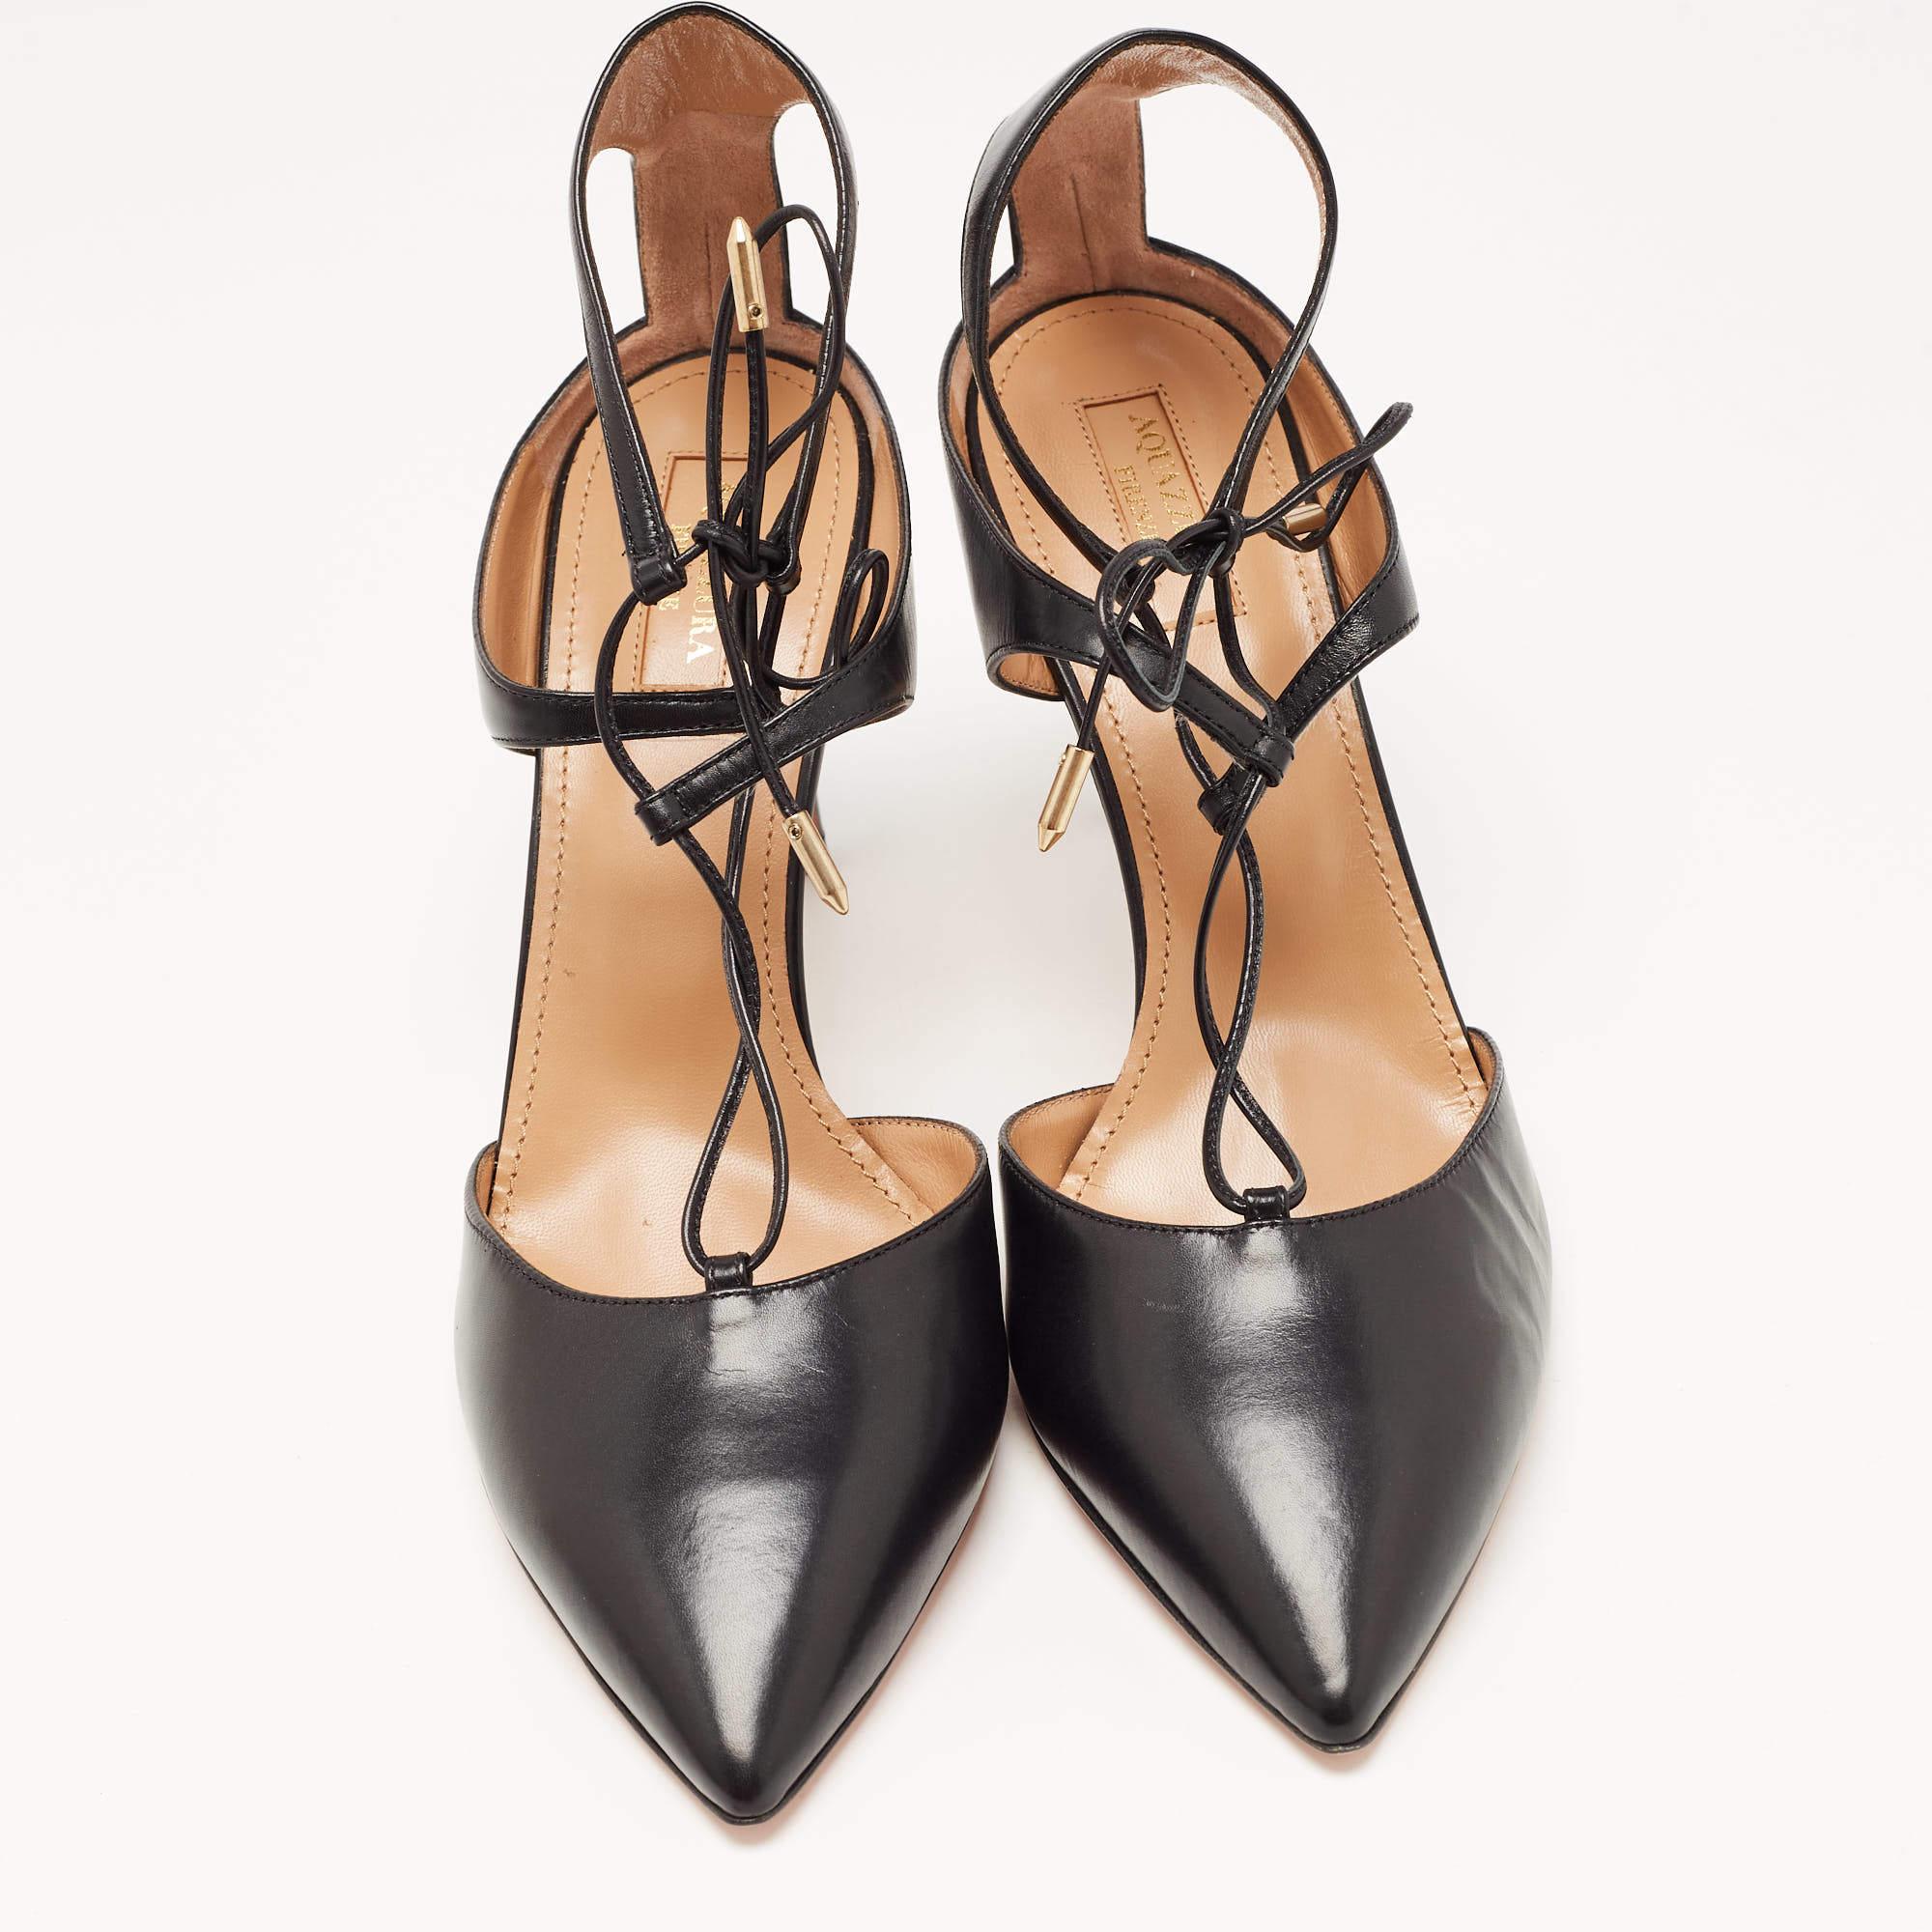 This pair of pumps is uniquely designed and makes for a distinct appearance. Created from quality materials, it is enriched with classic elements.

Includes
Original Box